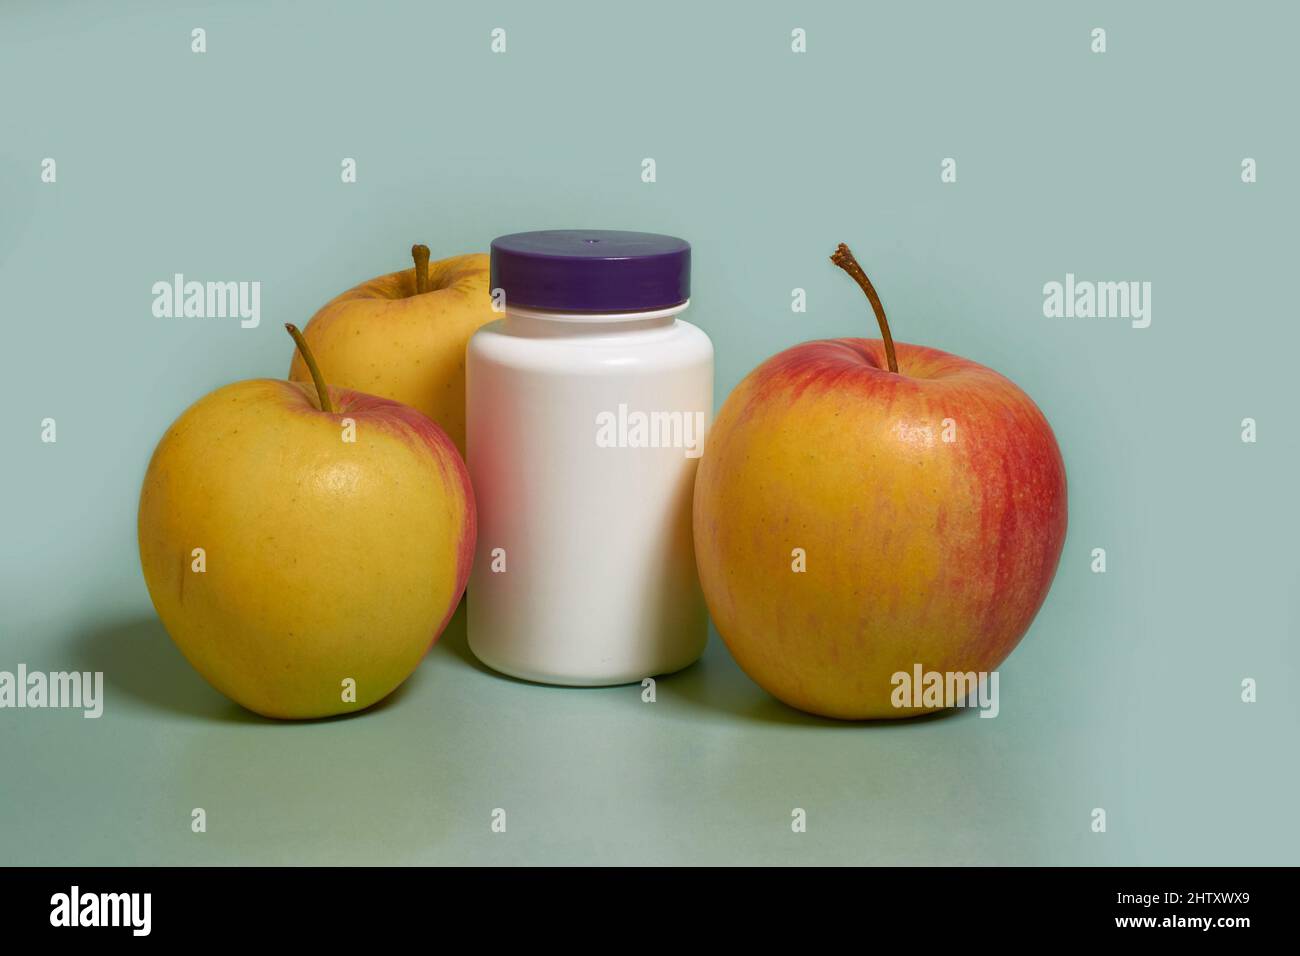 Mock up. A white plastic jar with a purple lid and apples Stock Photo